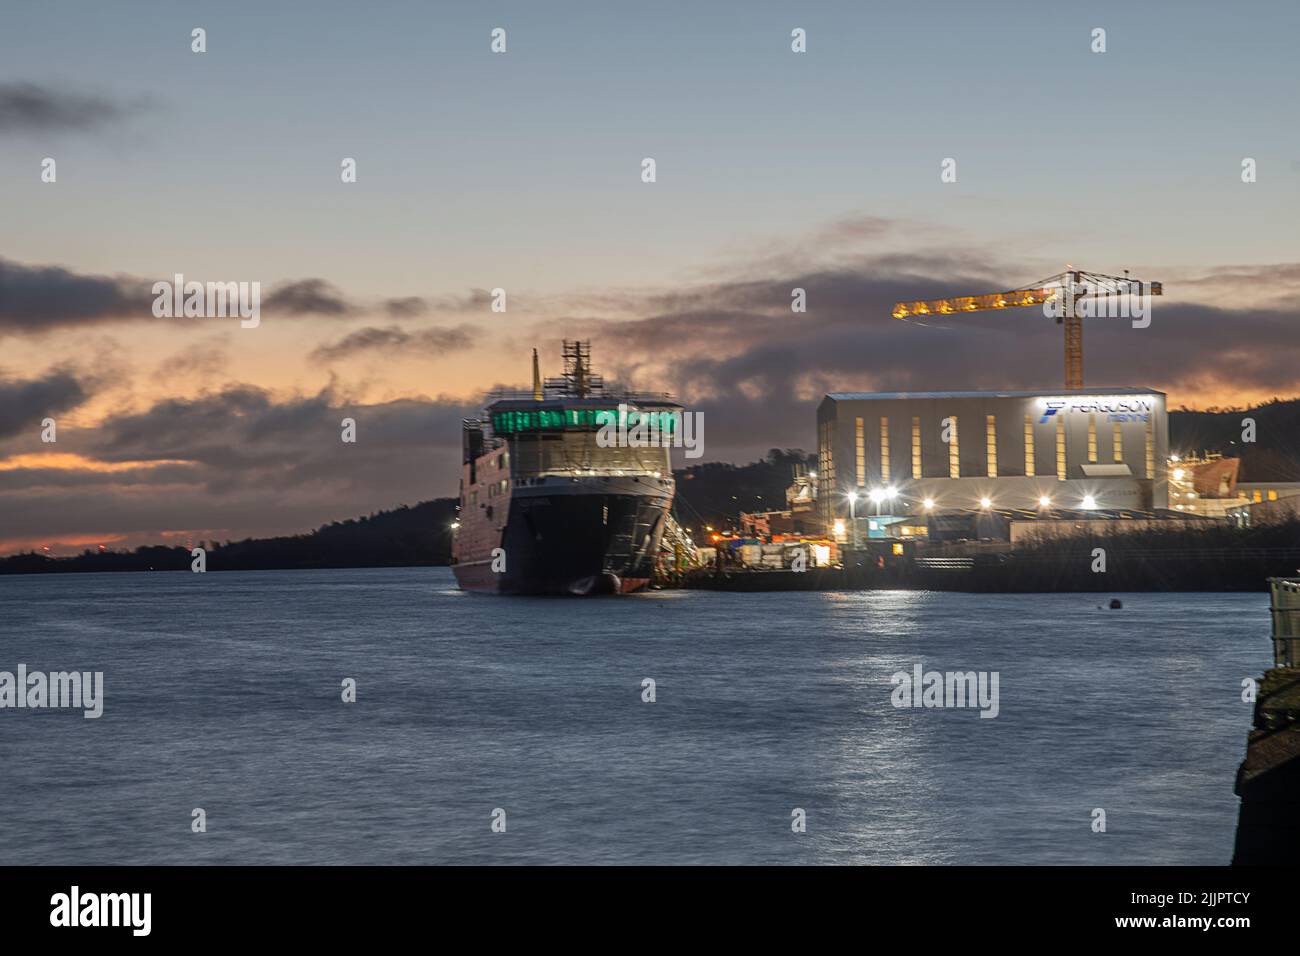 A closeup of a ferry in the Port Glasgow, Inverclyde, Scotland, United Kingdom at twilight Stock Photo